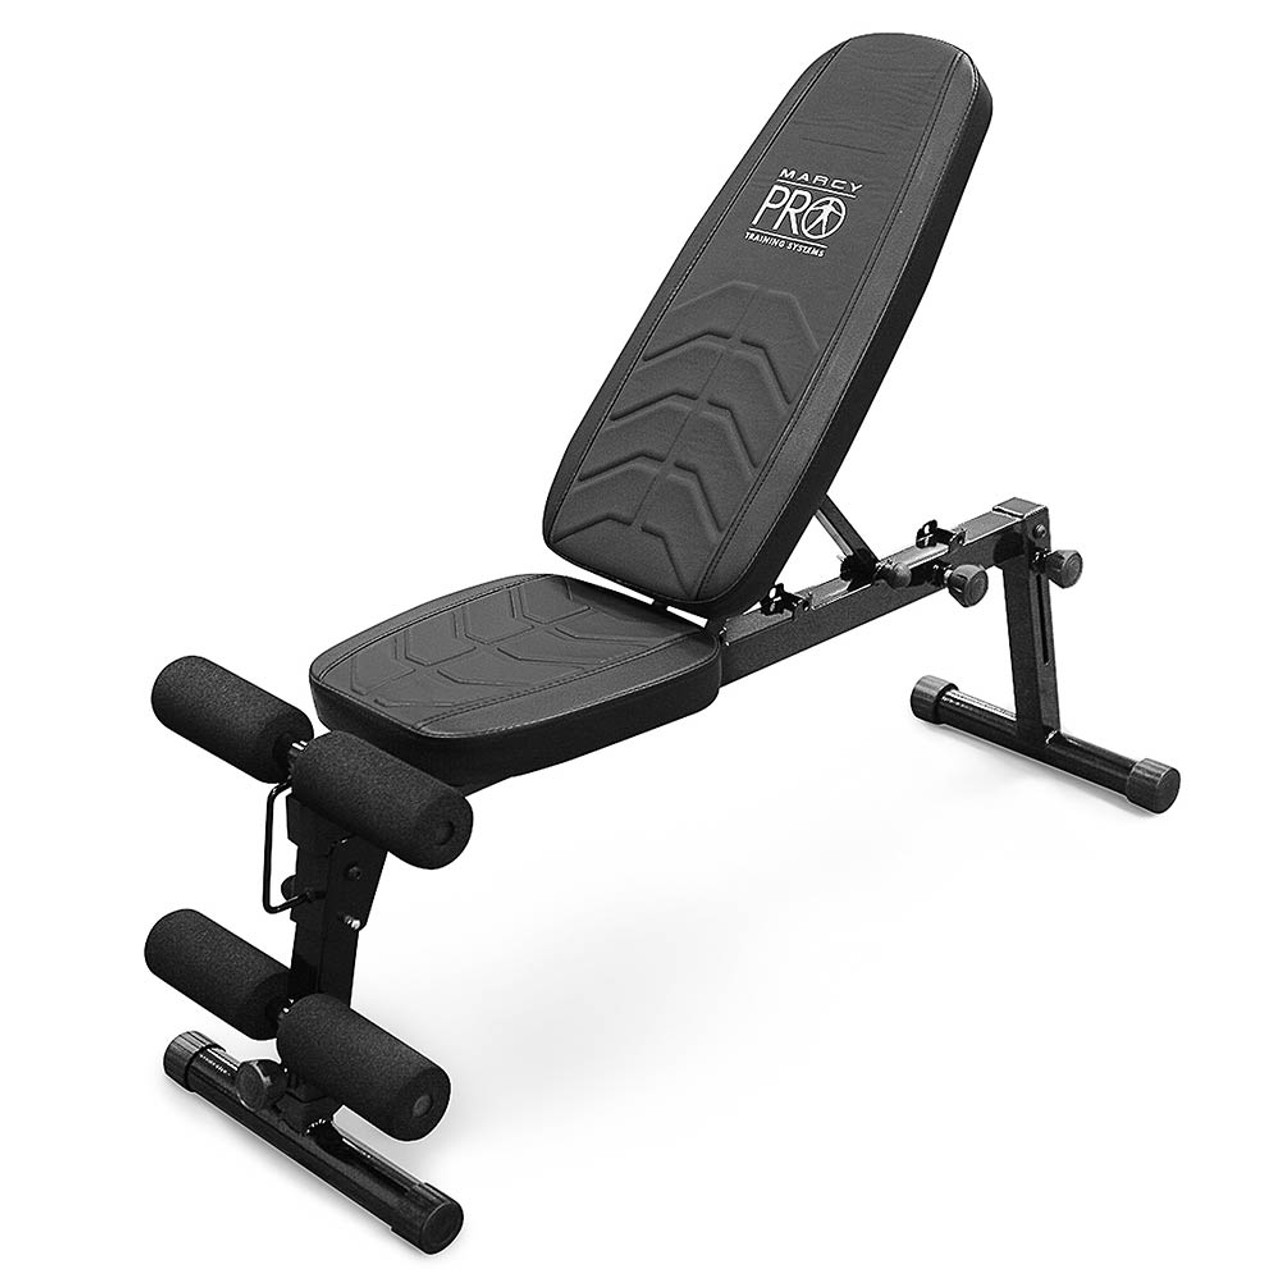 Marcy Pro Utility Bench Pm 10110 Quality Strength Products